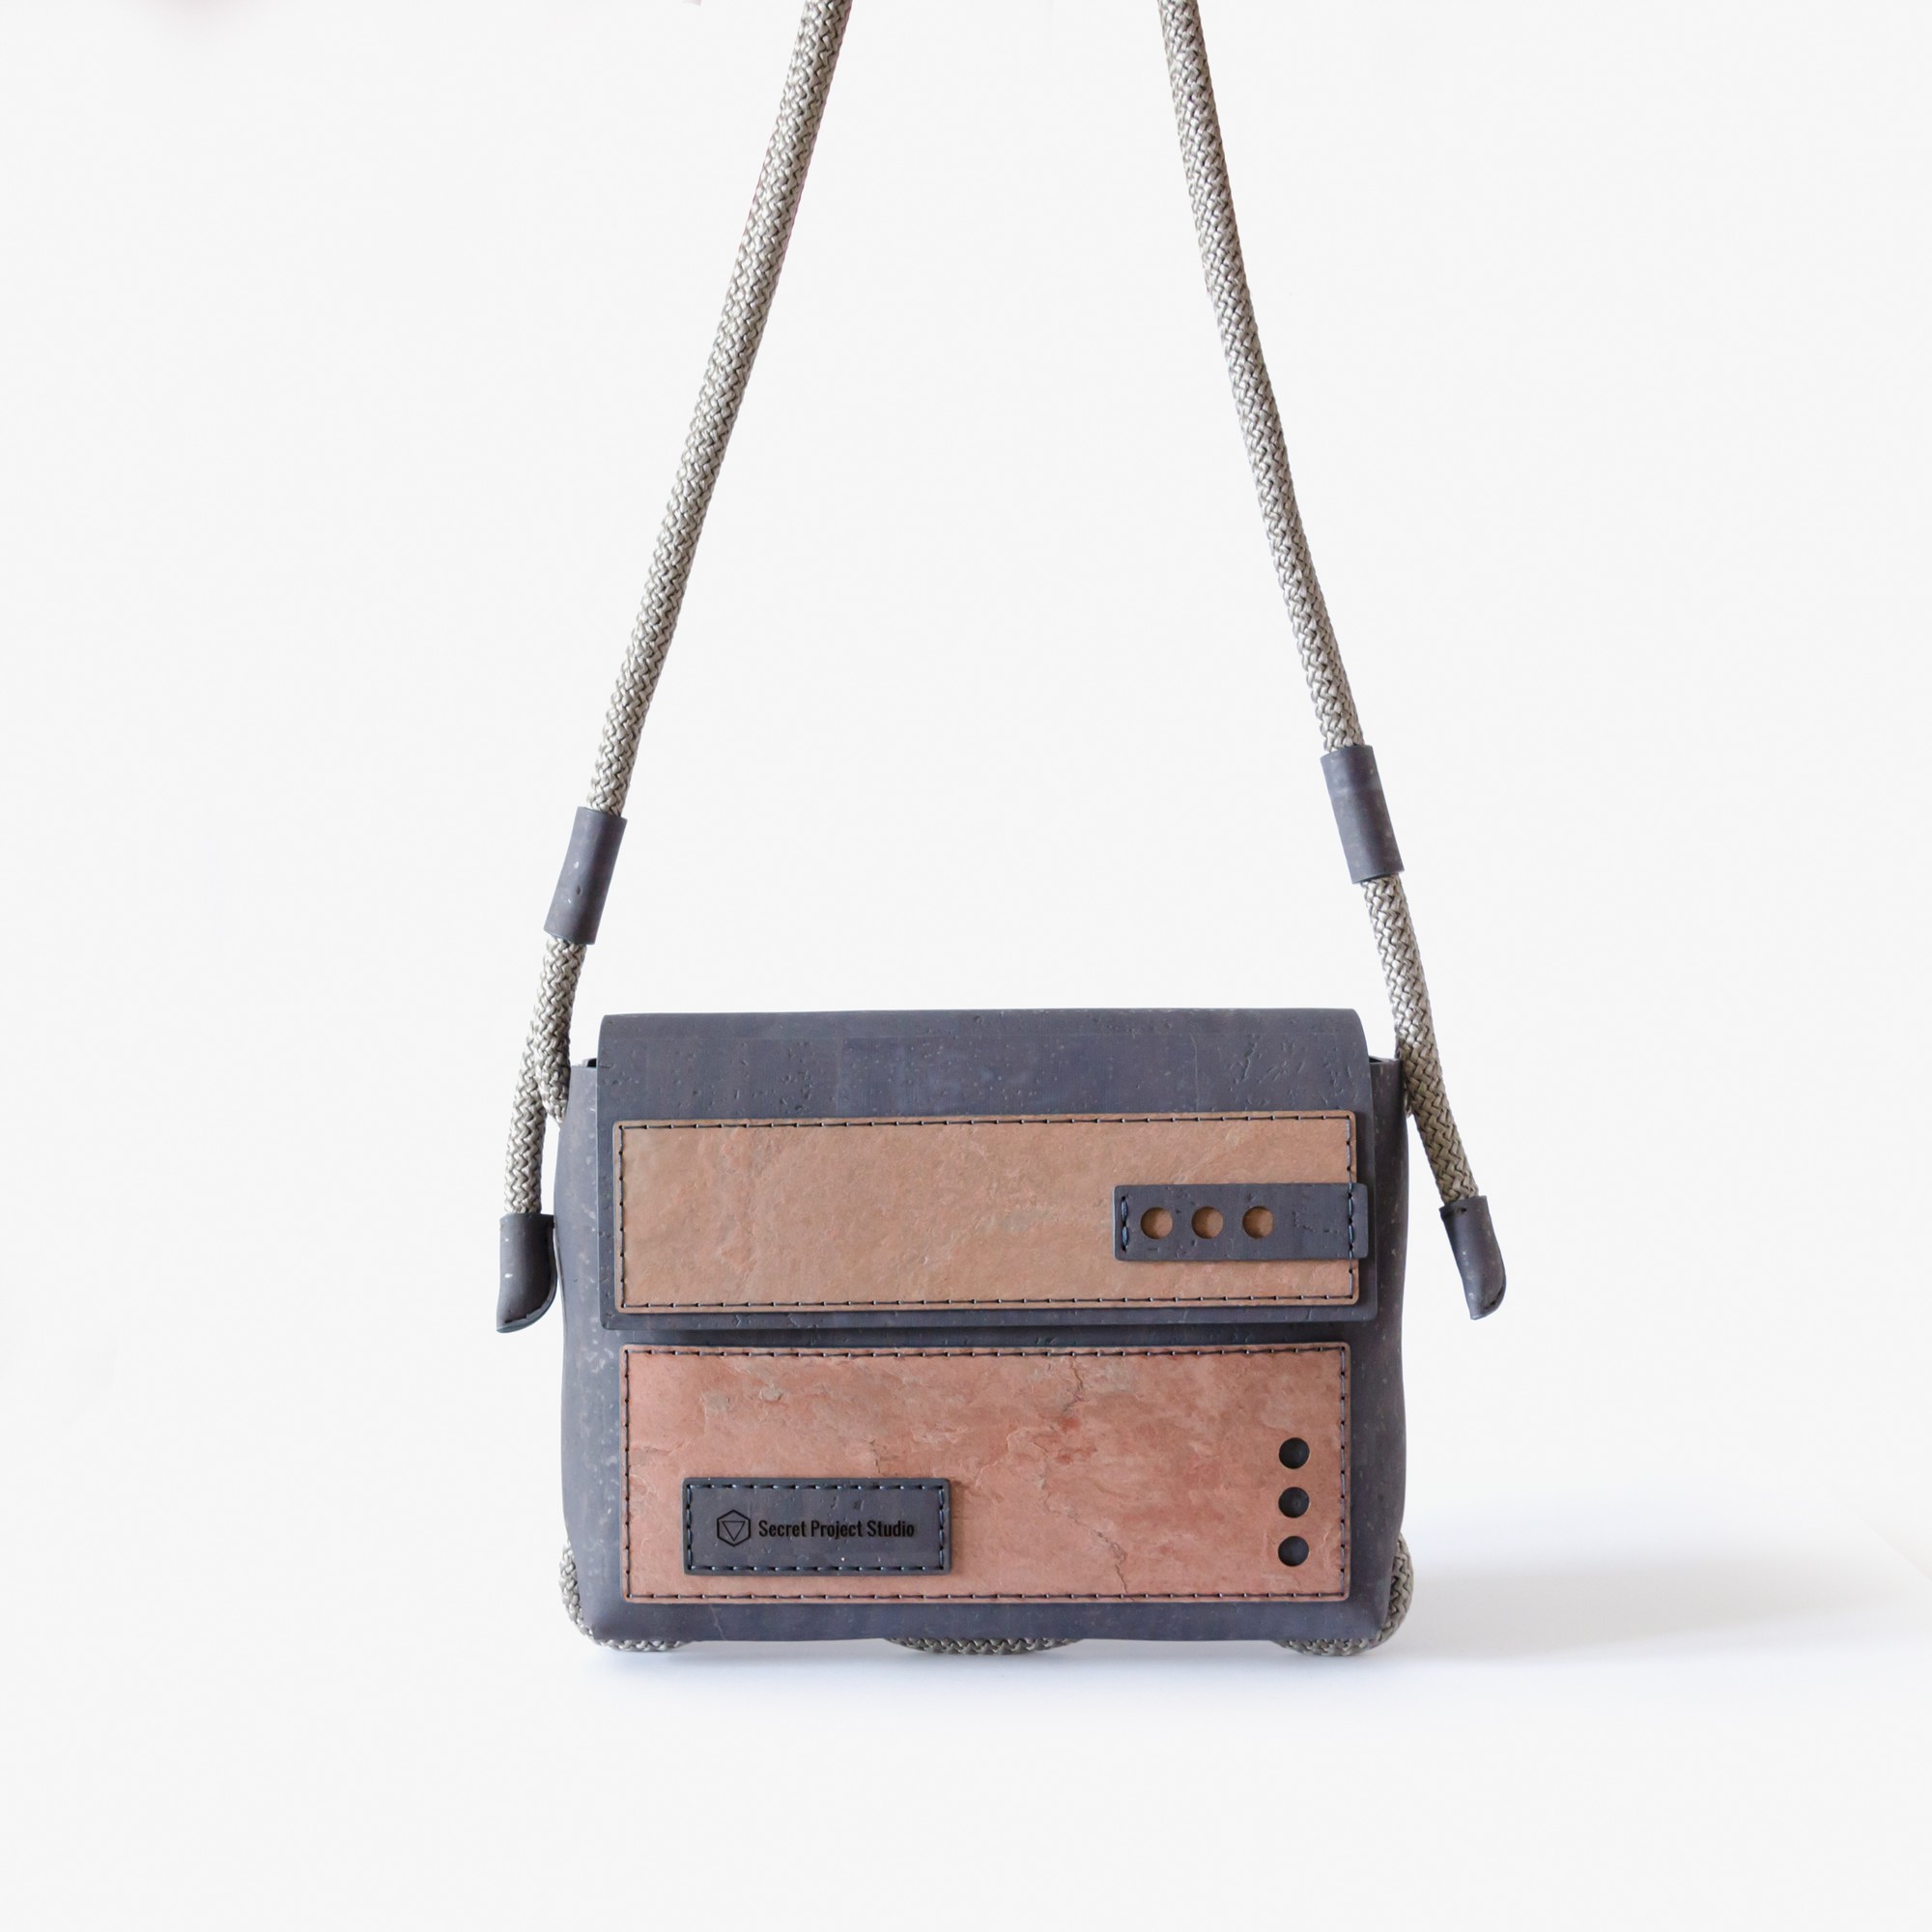 Crossbody bag Lohan M in charcoal cork and rose stone